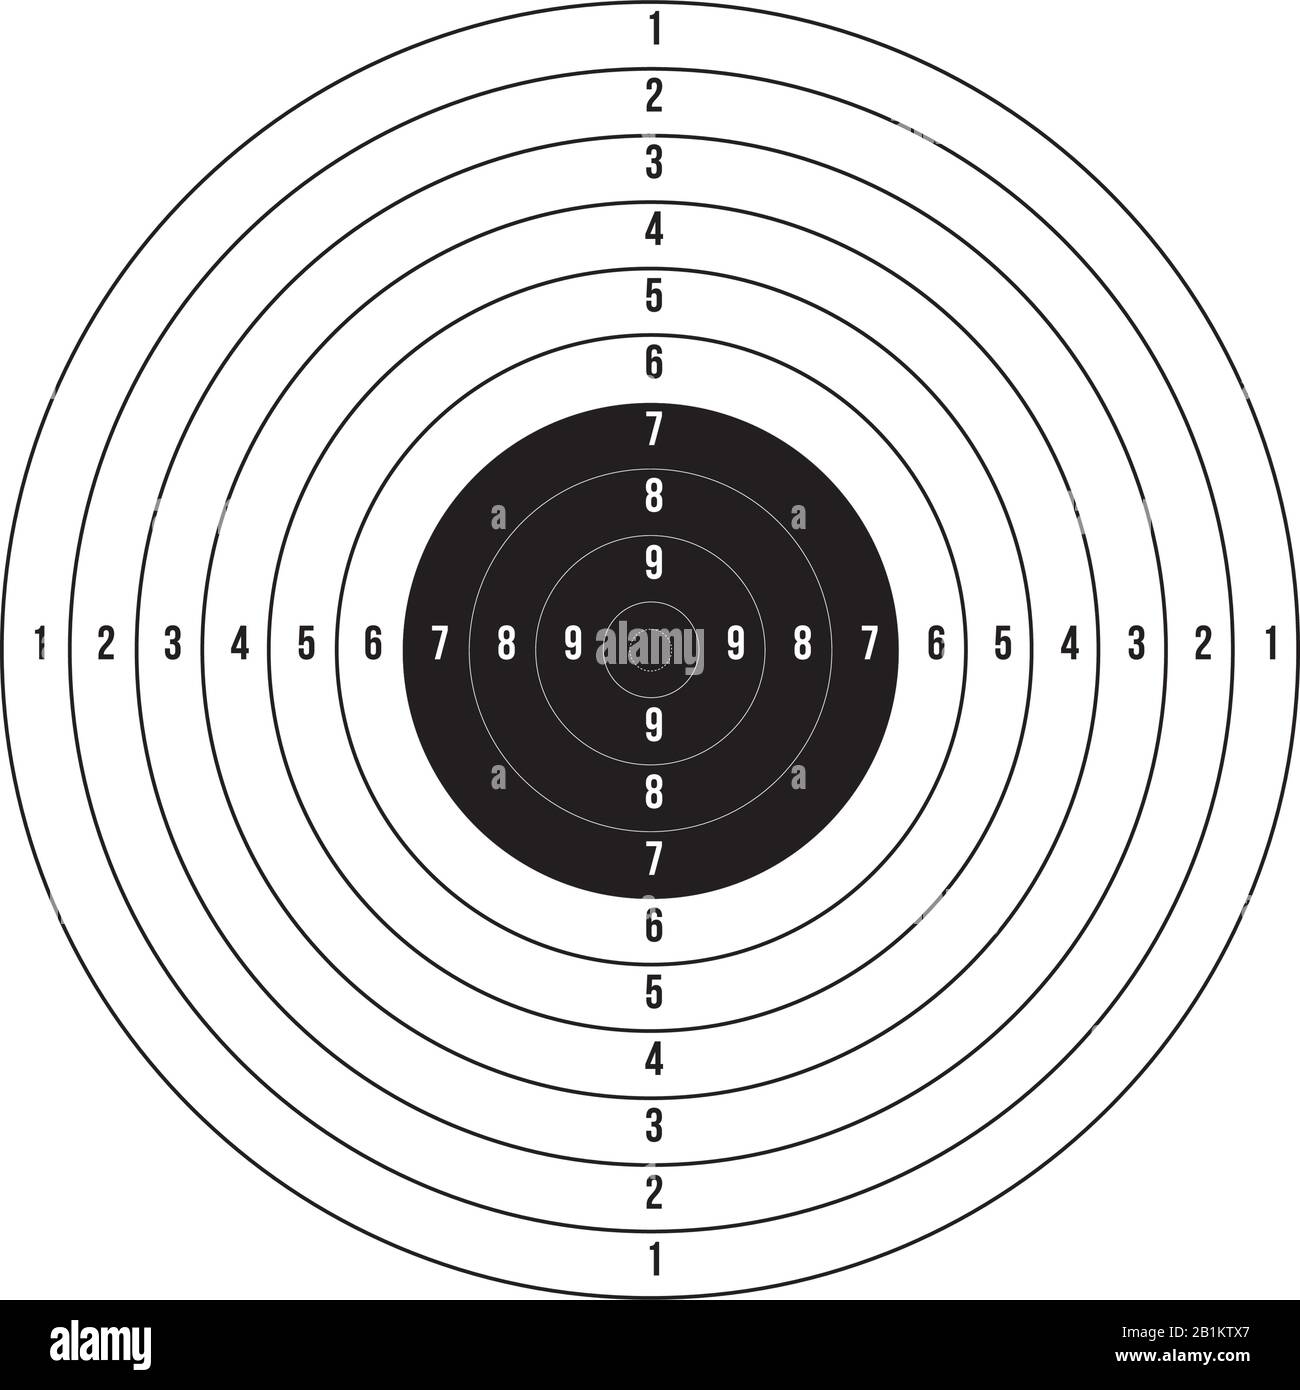 ISSF 10 meter air pistol. Olympic shooting archery target printable. Stock Vector illustration isolated on white background. Stock Vector